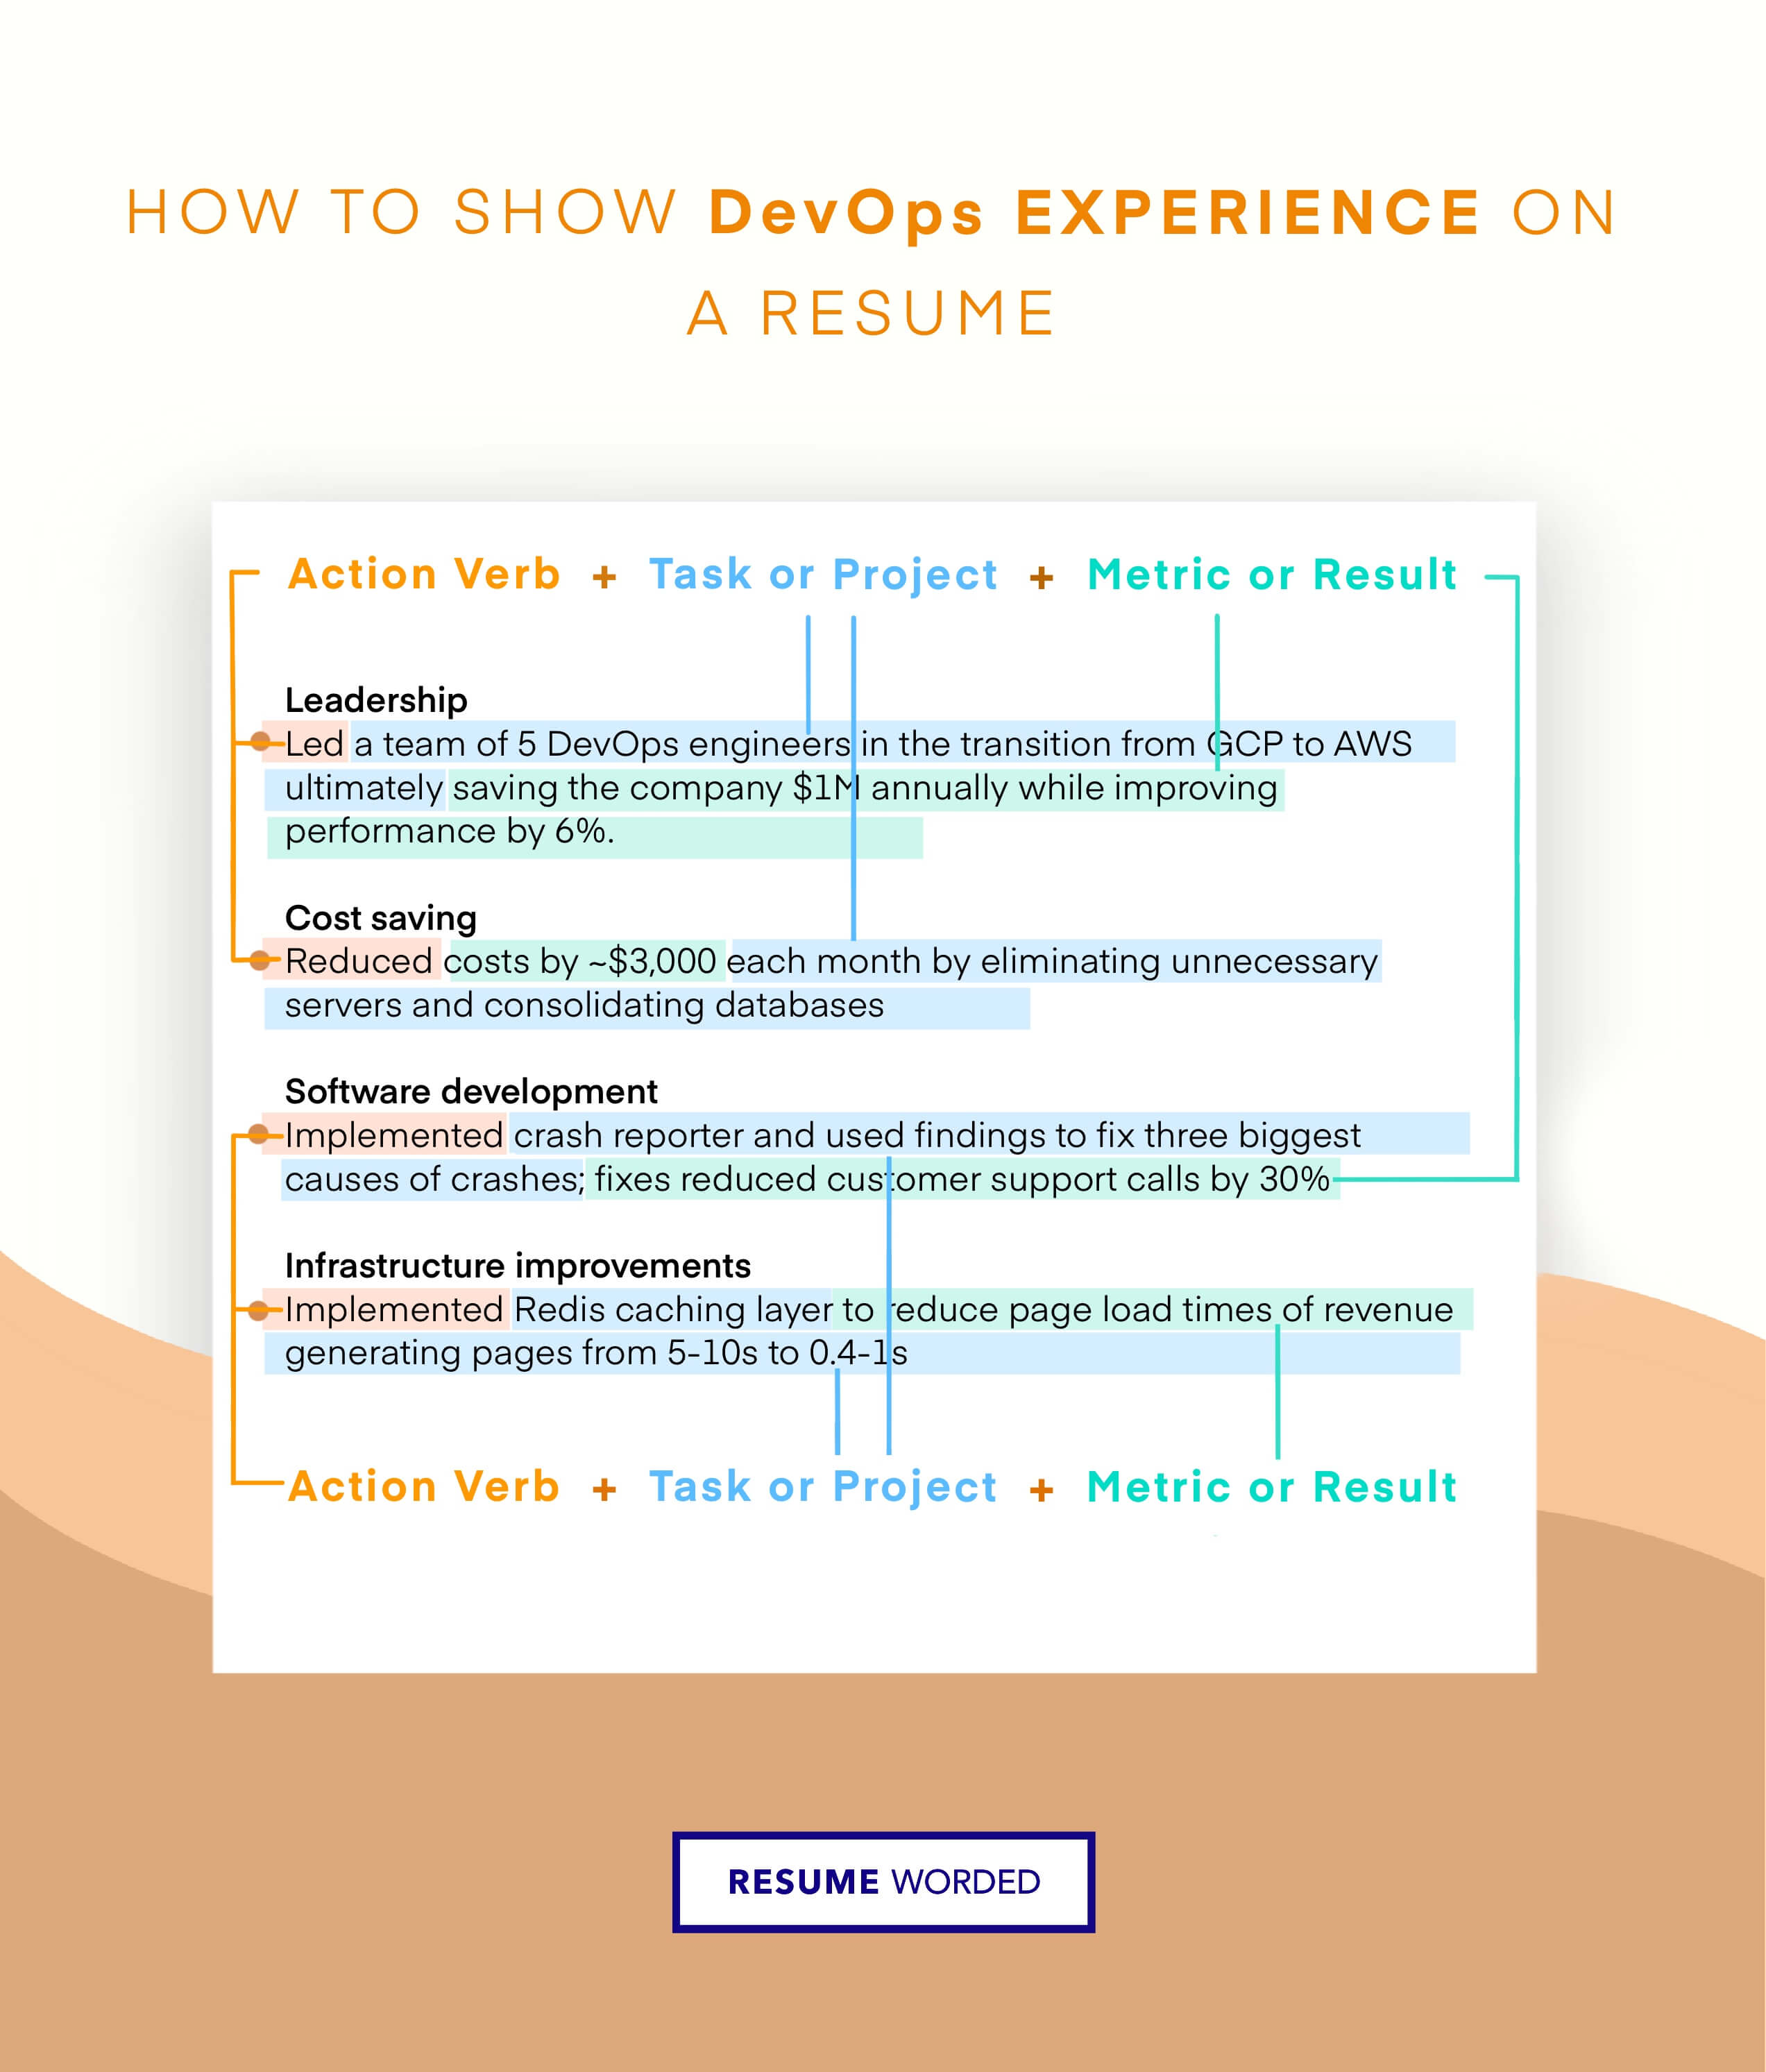 Include specific DevOps tools and practices - DevOps Manager CV